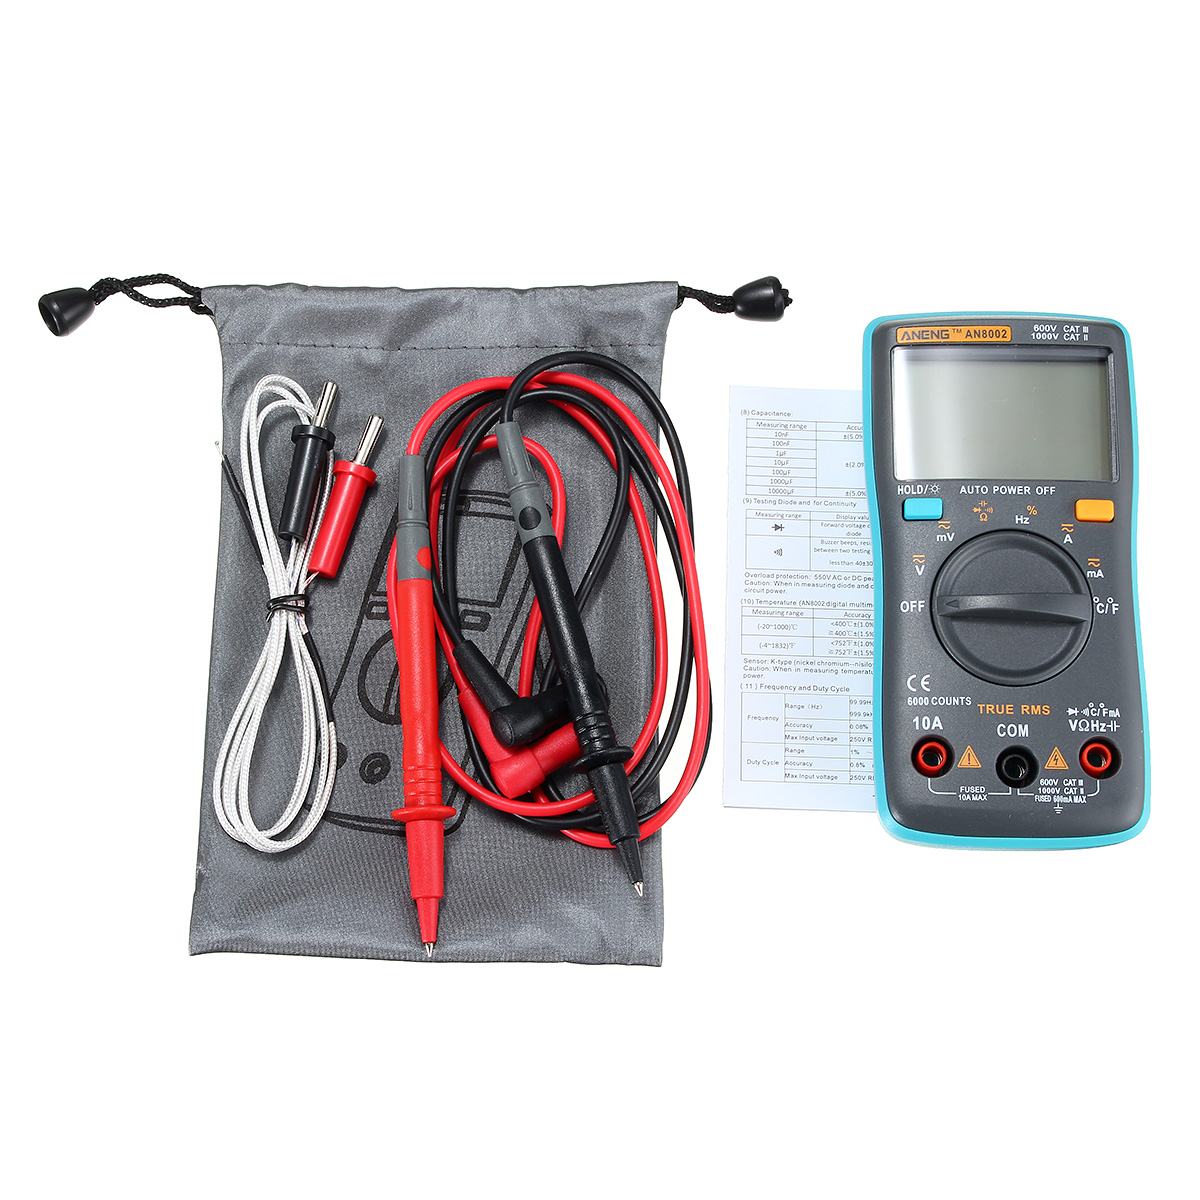 ANENG AN8002 Digital True RMS 6000 Counts Multimeter AC/DC Current Voltage Frequency Resistance Temperature Tester ℃/℉ 132